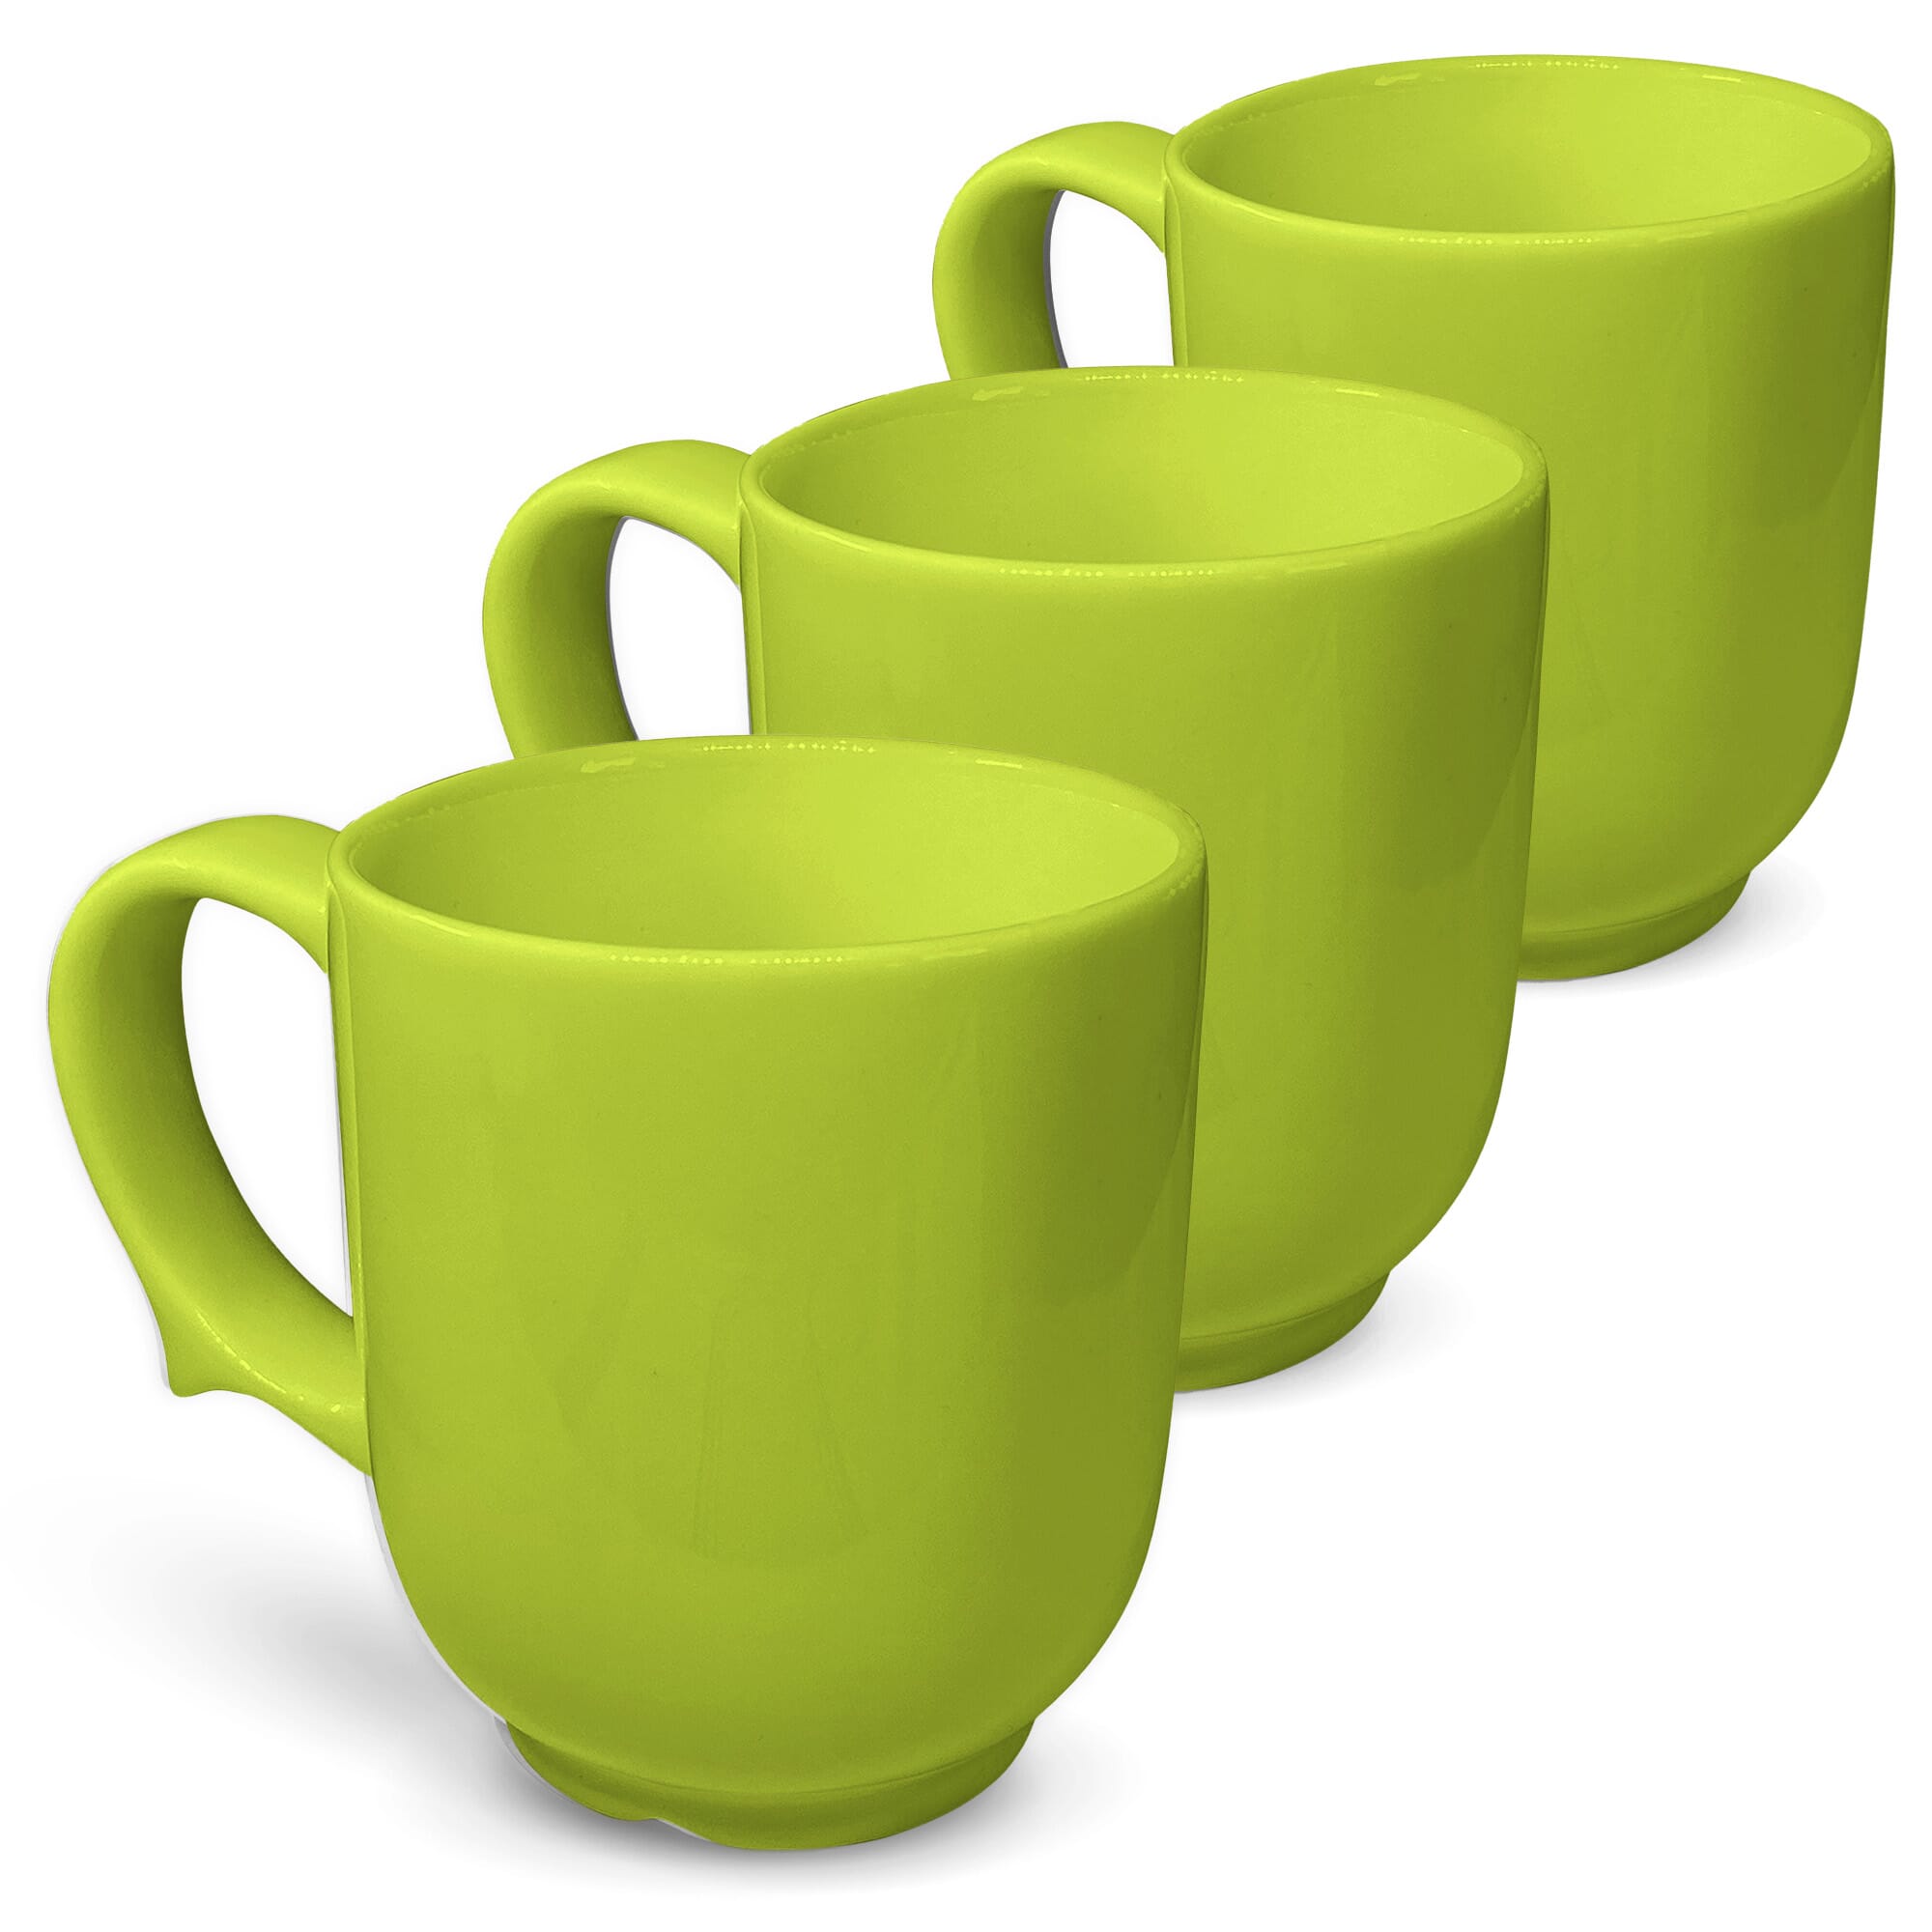 View Dignity One Handled Mug Green Pack of 3 information